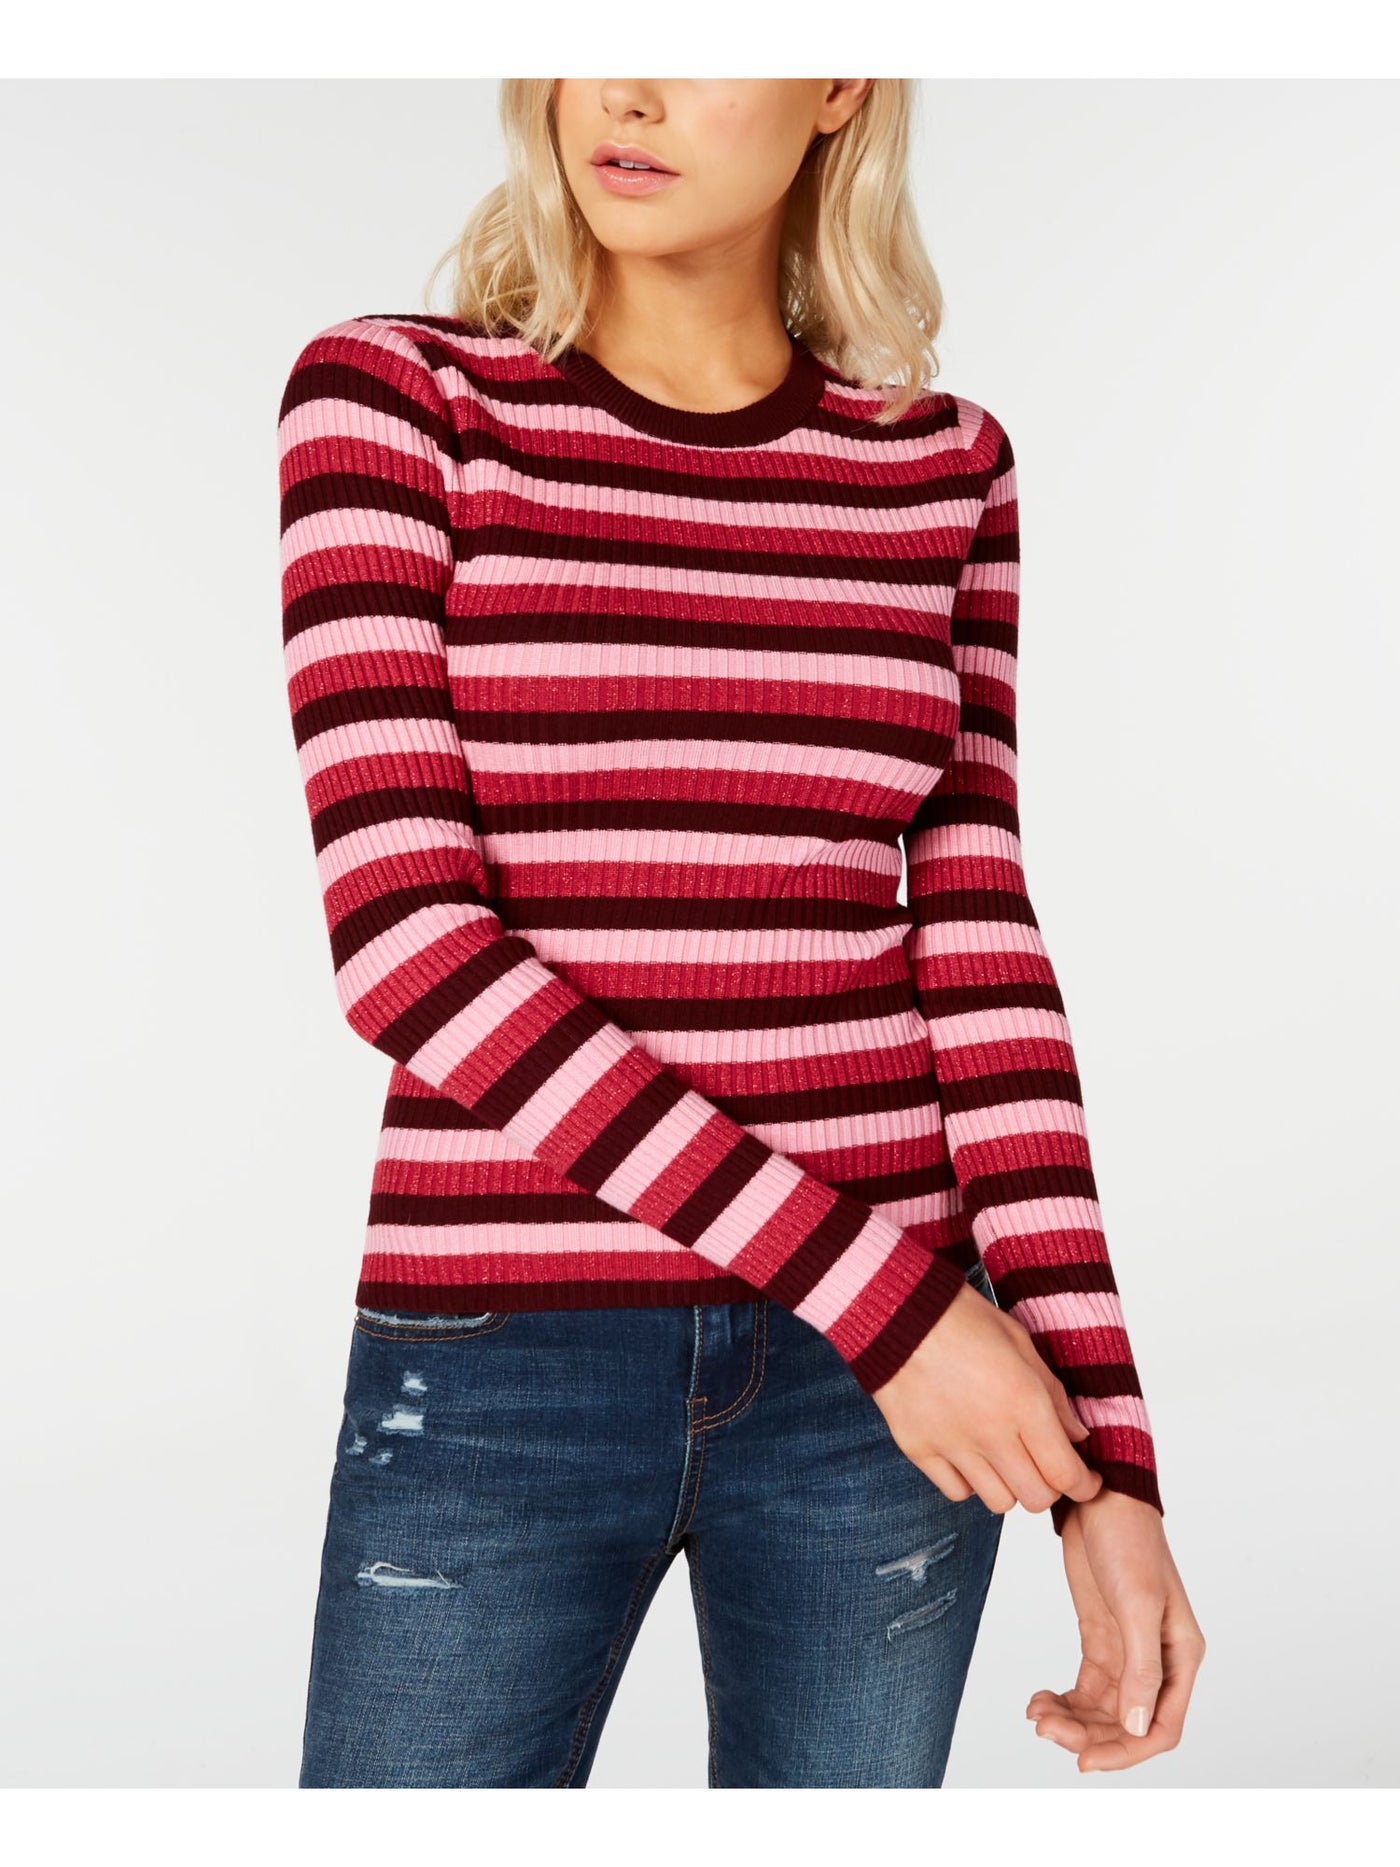 HOOKED UP Womens Pink Stretch Metallic Striped Long Sleeve Crew Neck Sweater Juniors S